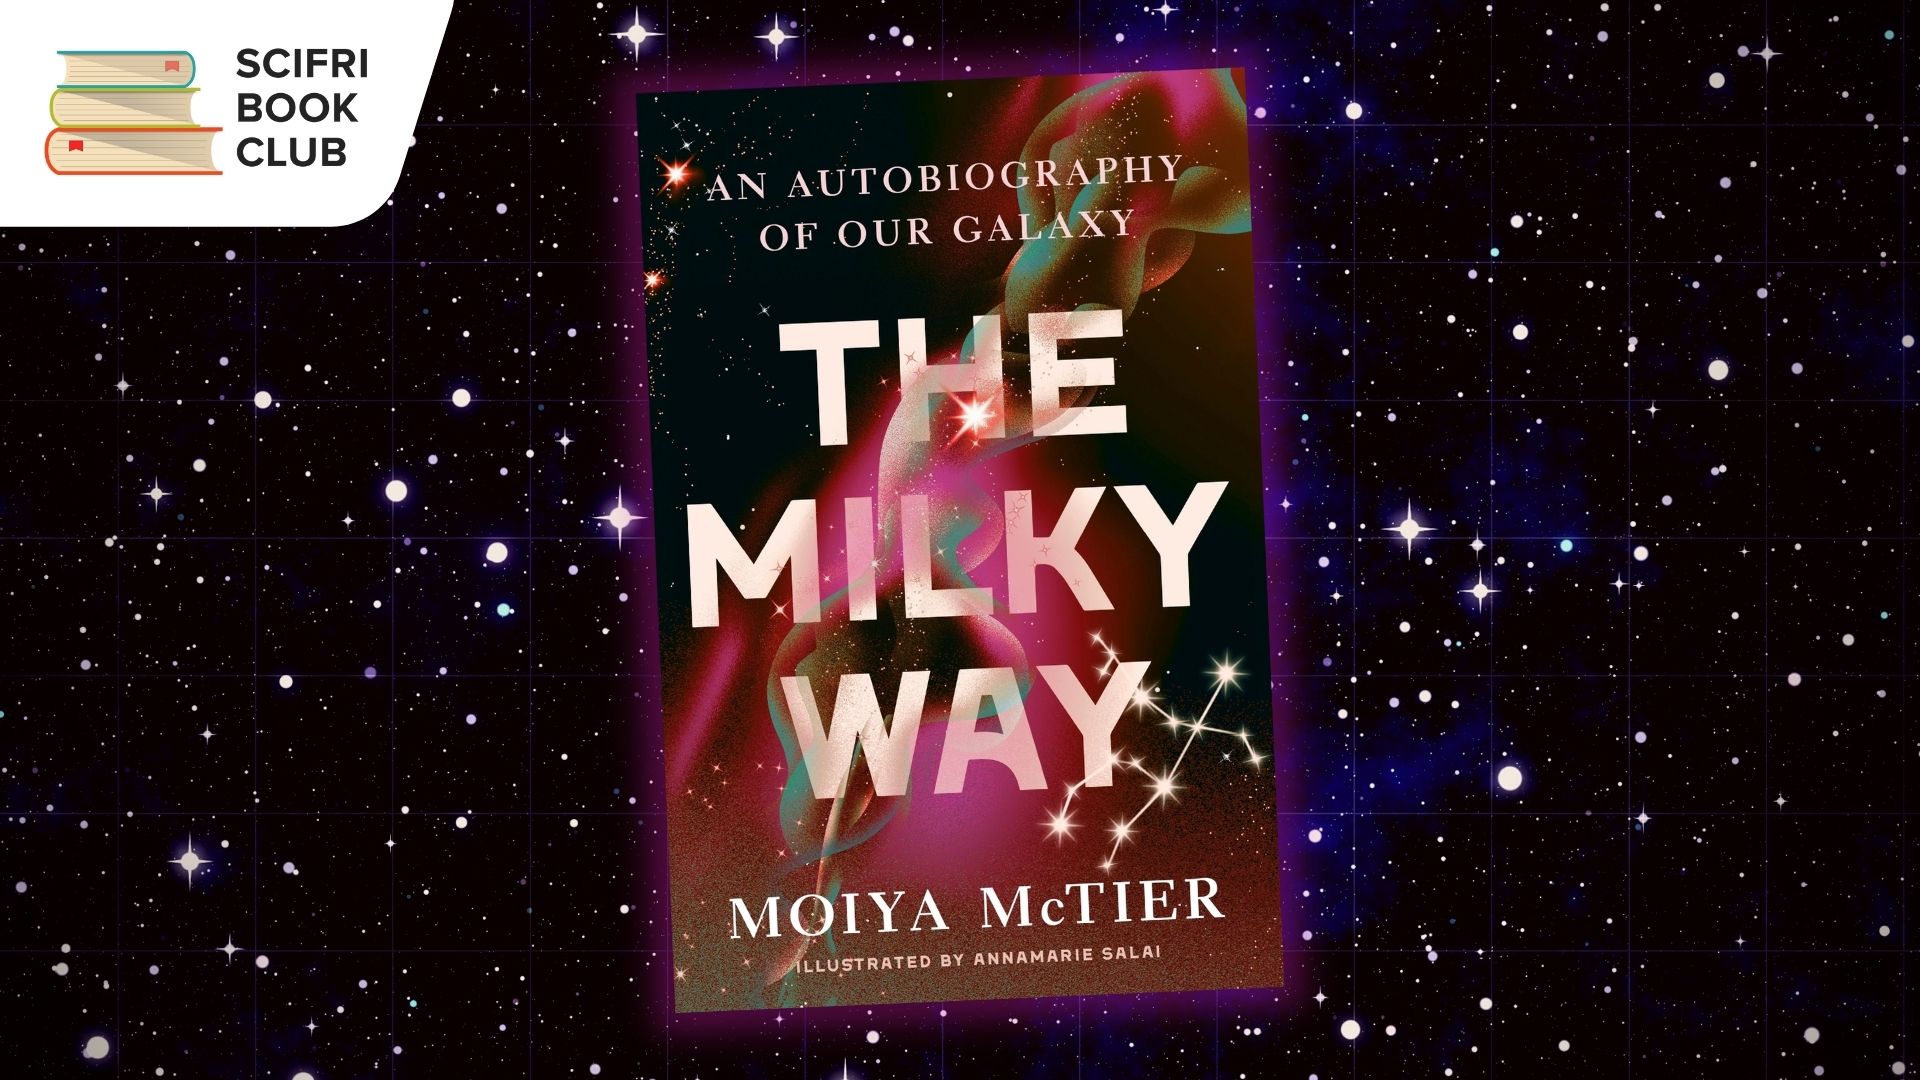 Moiya McTier on Folklore, Science, and the Ancient Night Sky